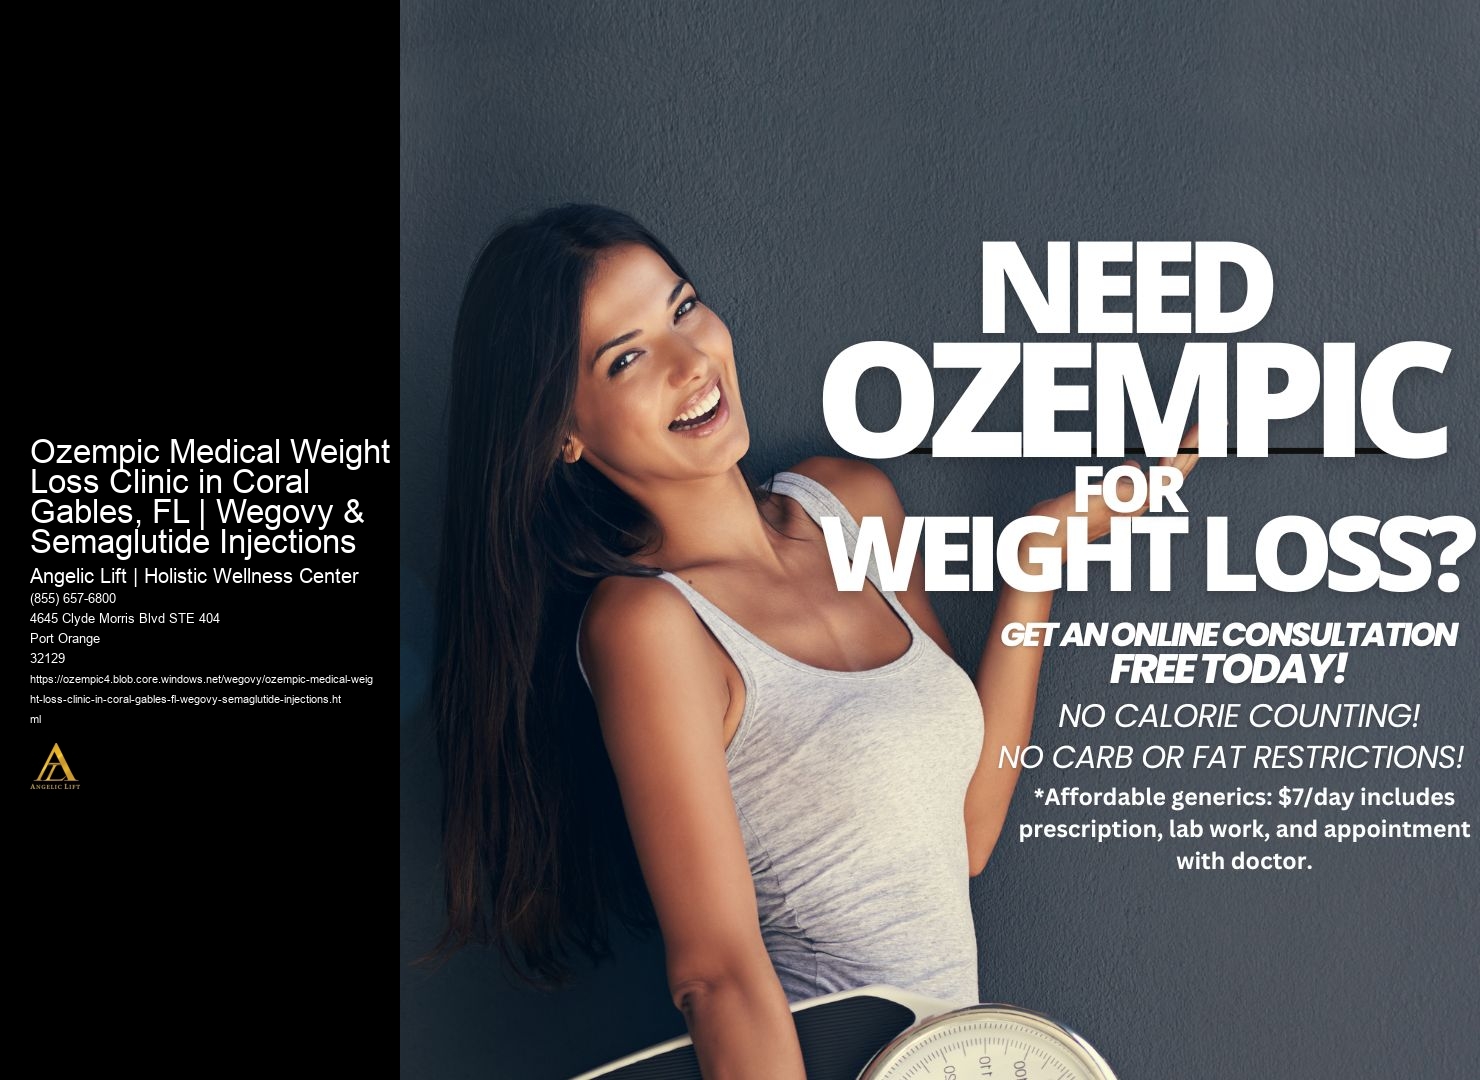 Ozempic Medical Weight Loss Clinic in Coral Gables, FL | Wegovy & Semaglutide Injections